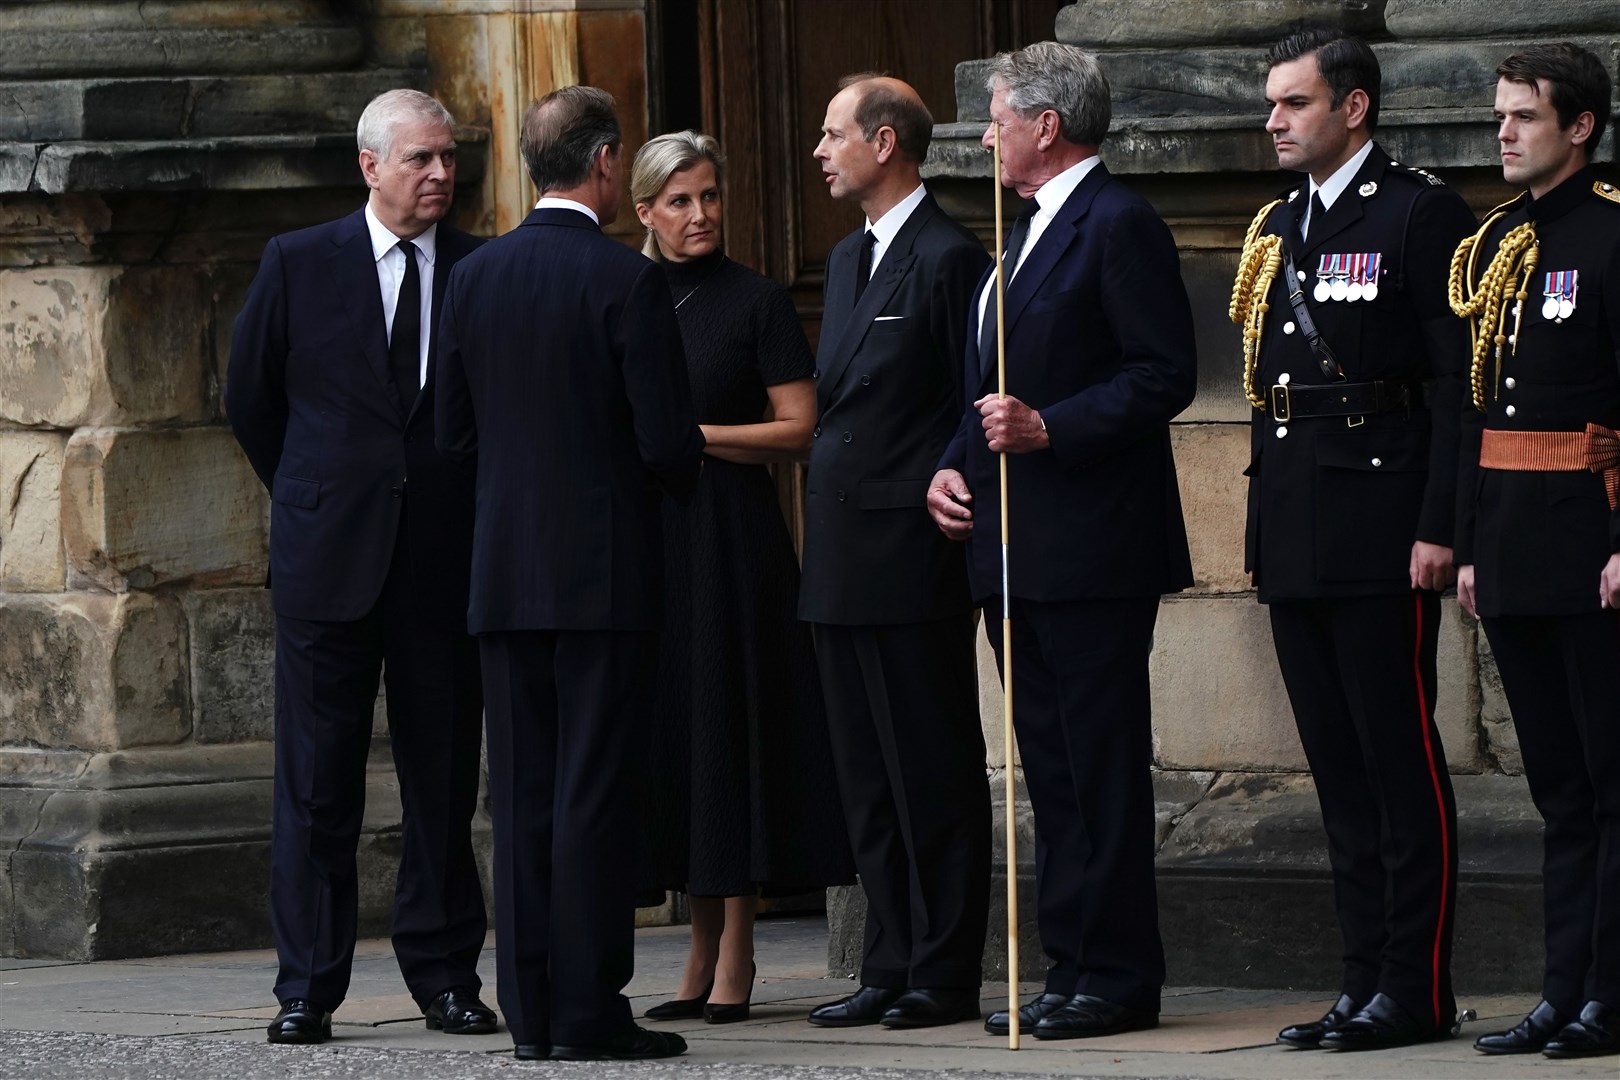 The Duke of York, the Countess of Wessex and the Earl of Wessex received the Queen’s coffin at the Palace of Holyroodhouse in Edinburgh (Aaron Chown/PA)